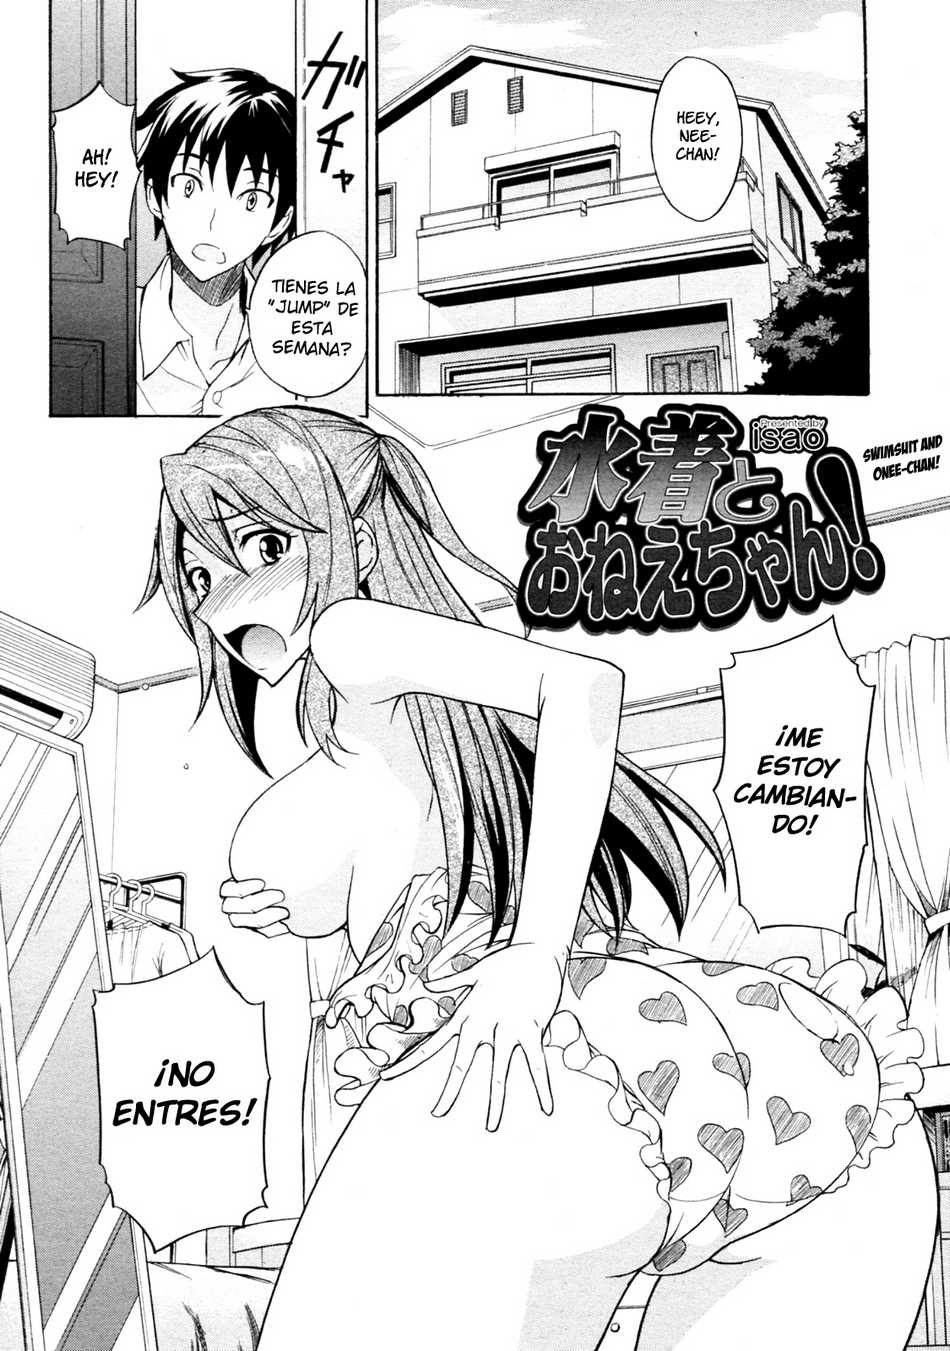 Swimsuit and Onee-chan! - Page #1